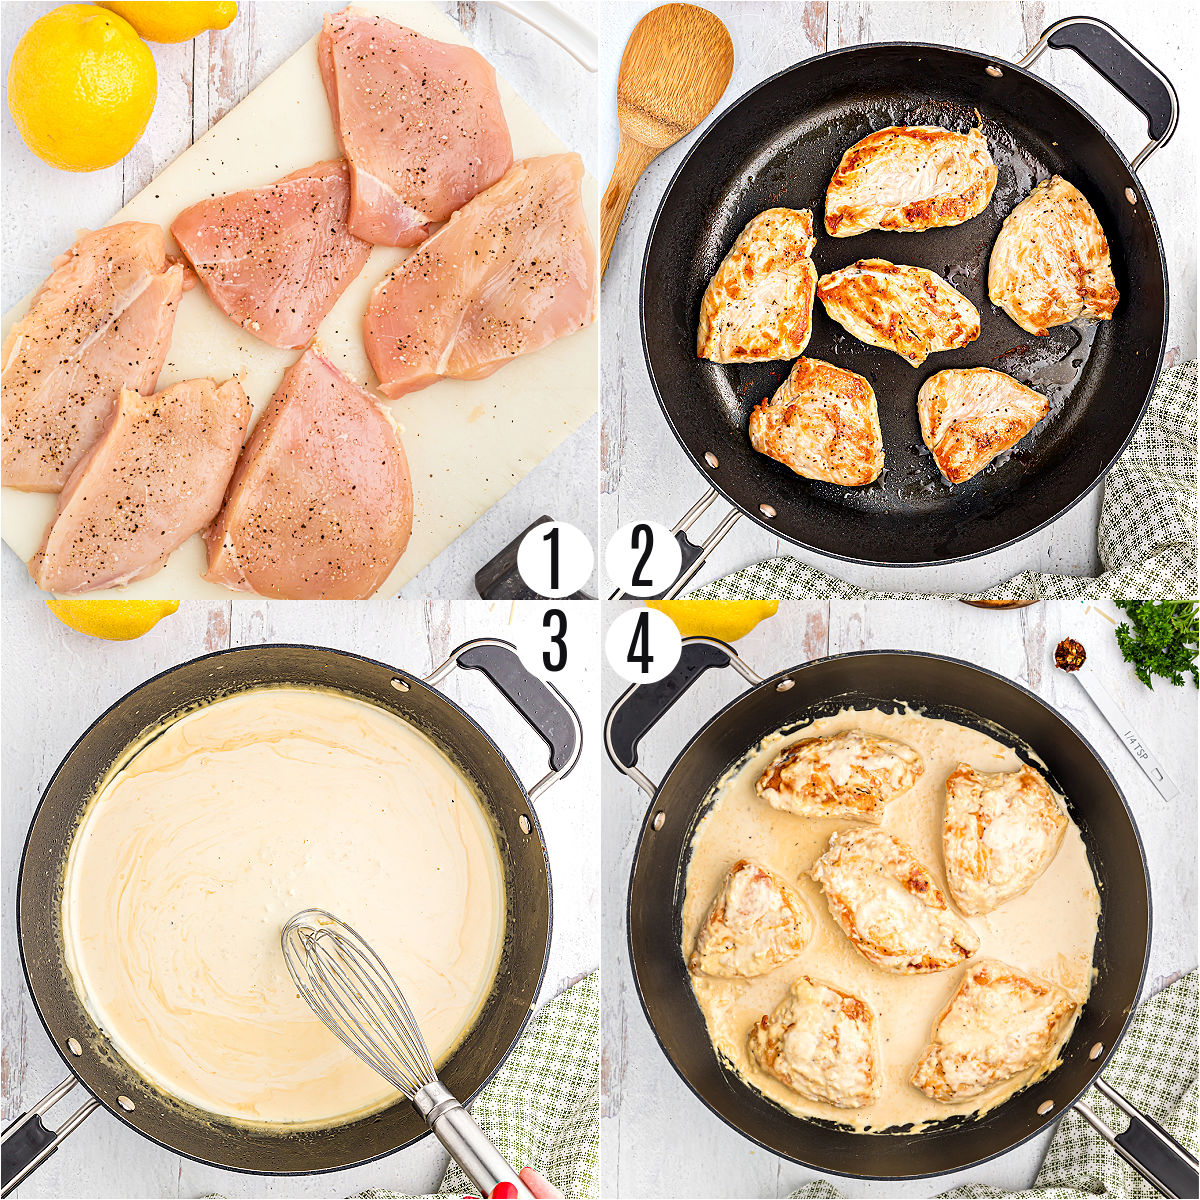 Step by step photos showing how to make lemon garlic chicken.